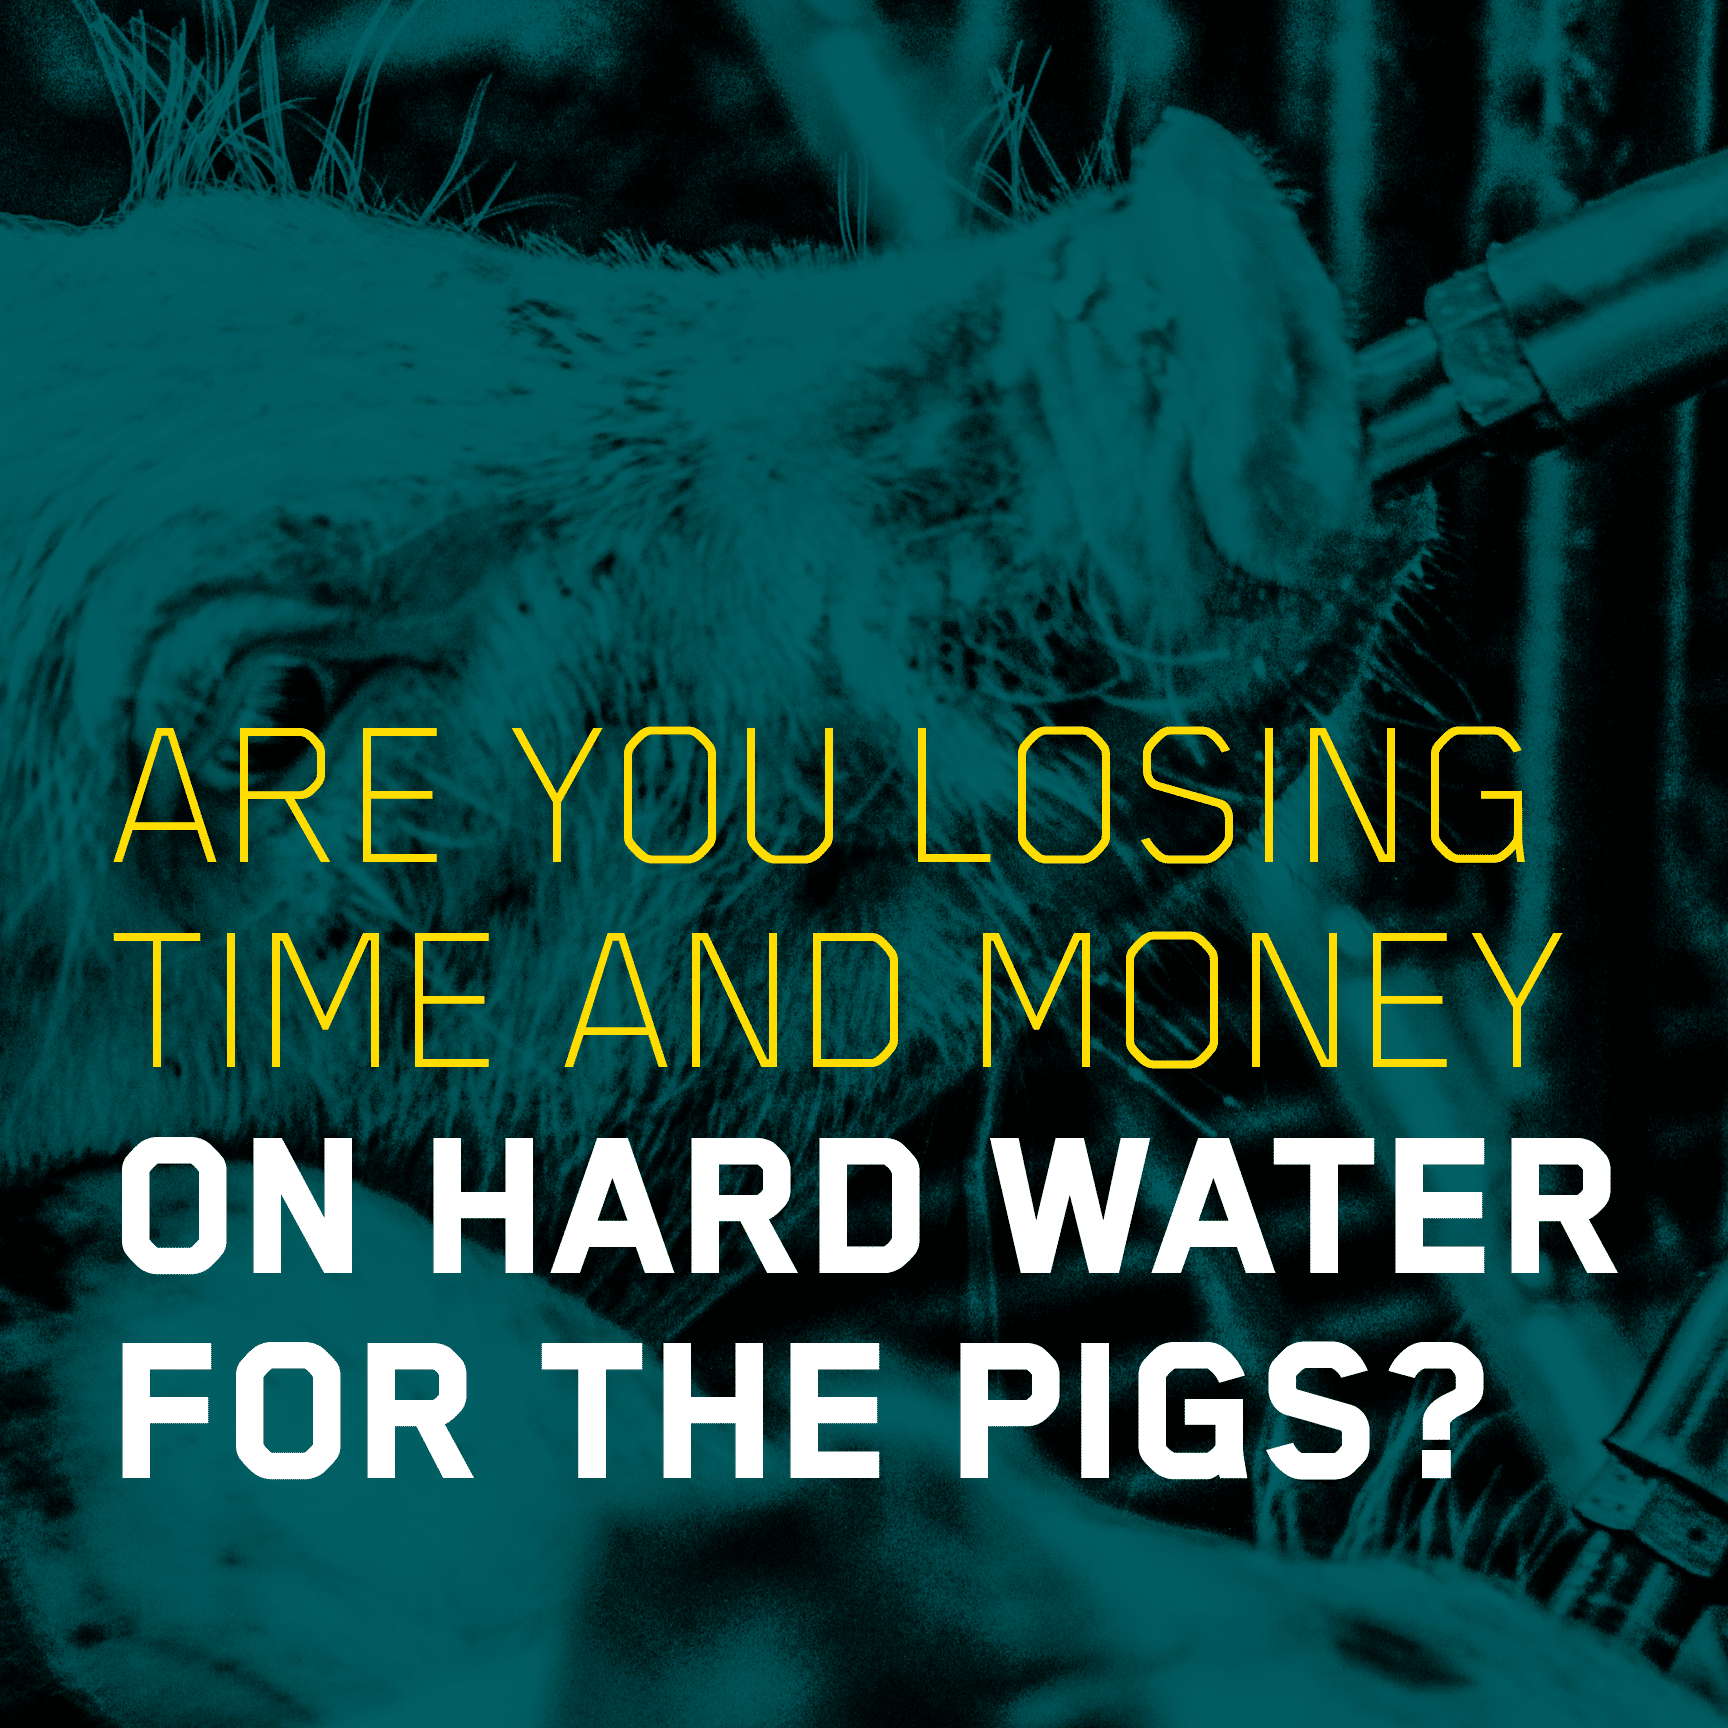 Losing time and money on hard water for the pigs?